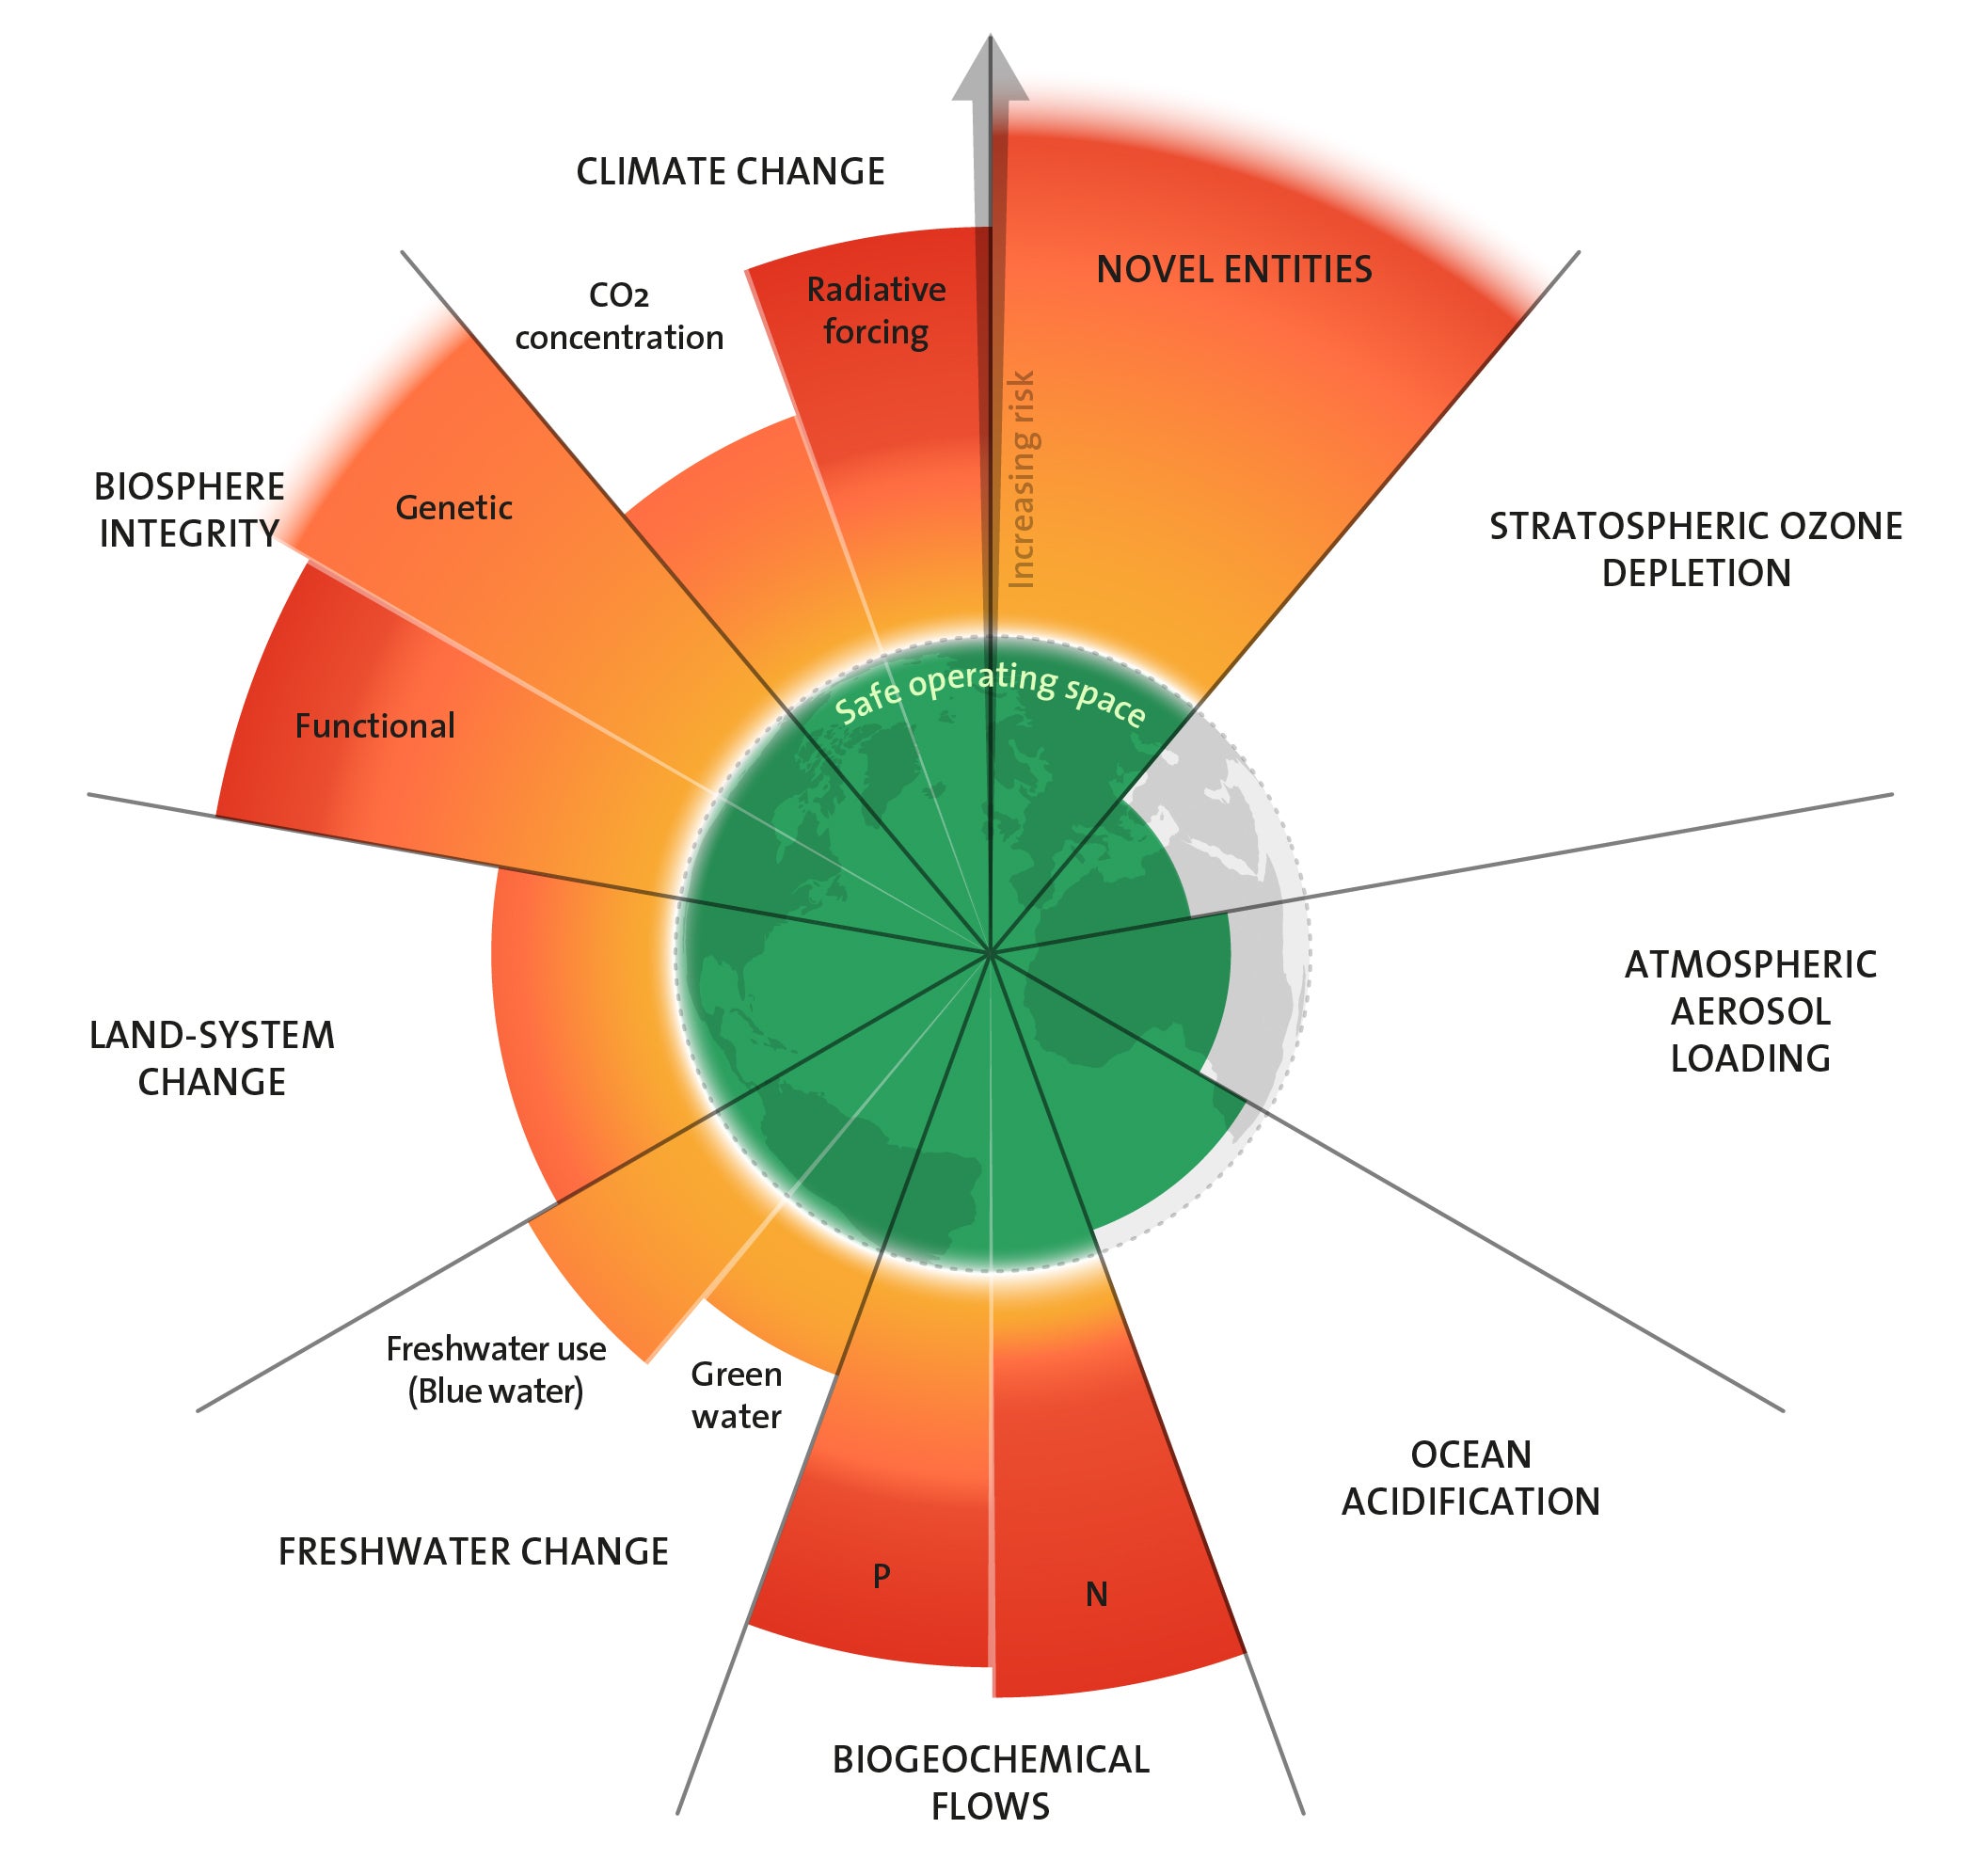 The state of the ‘Planetary boundaries’, according to a 2023 update